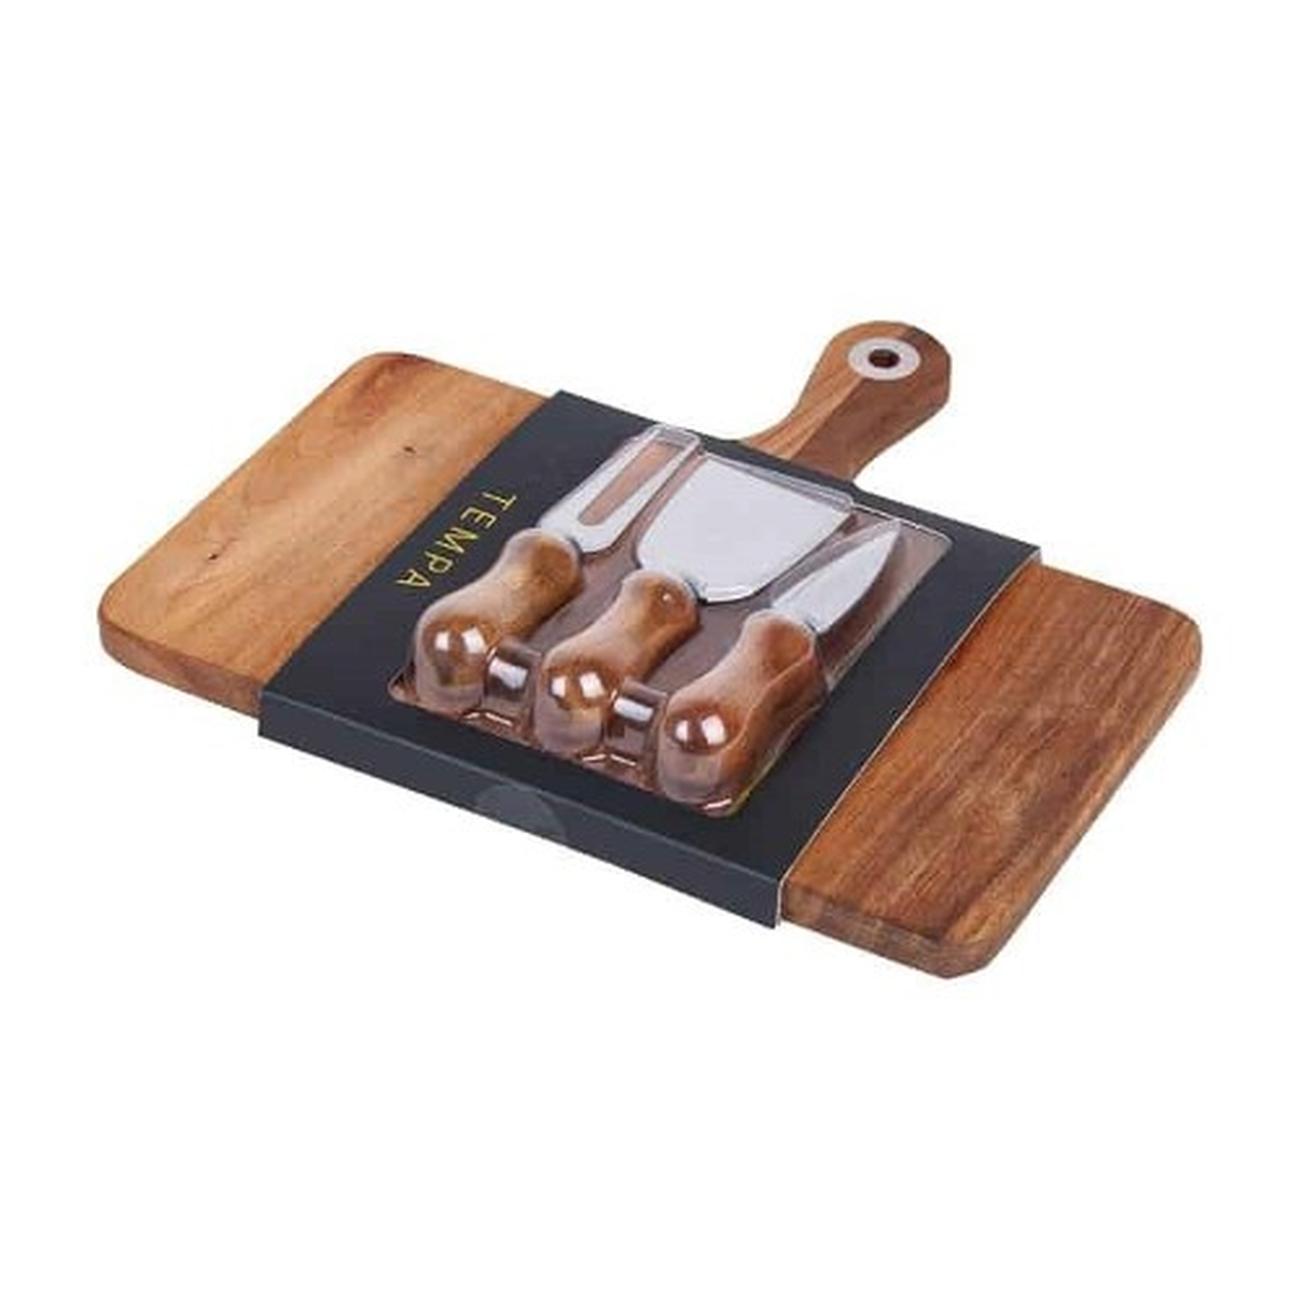 tempa-fromagerie-4pc-rectangle-cheese-board-and-knives-set - Tempa Fromagerie Rectangle 4pc Cheese Set